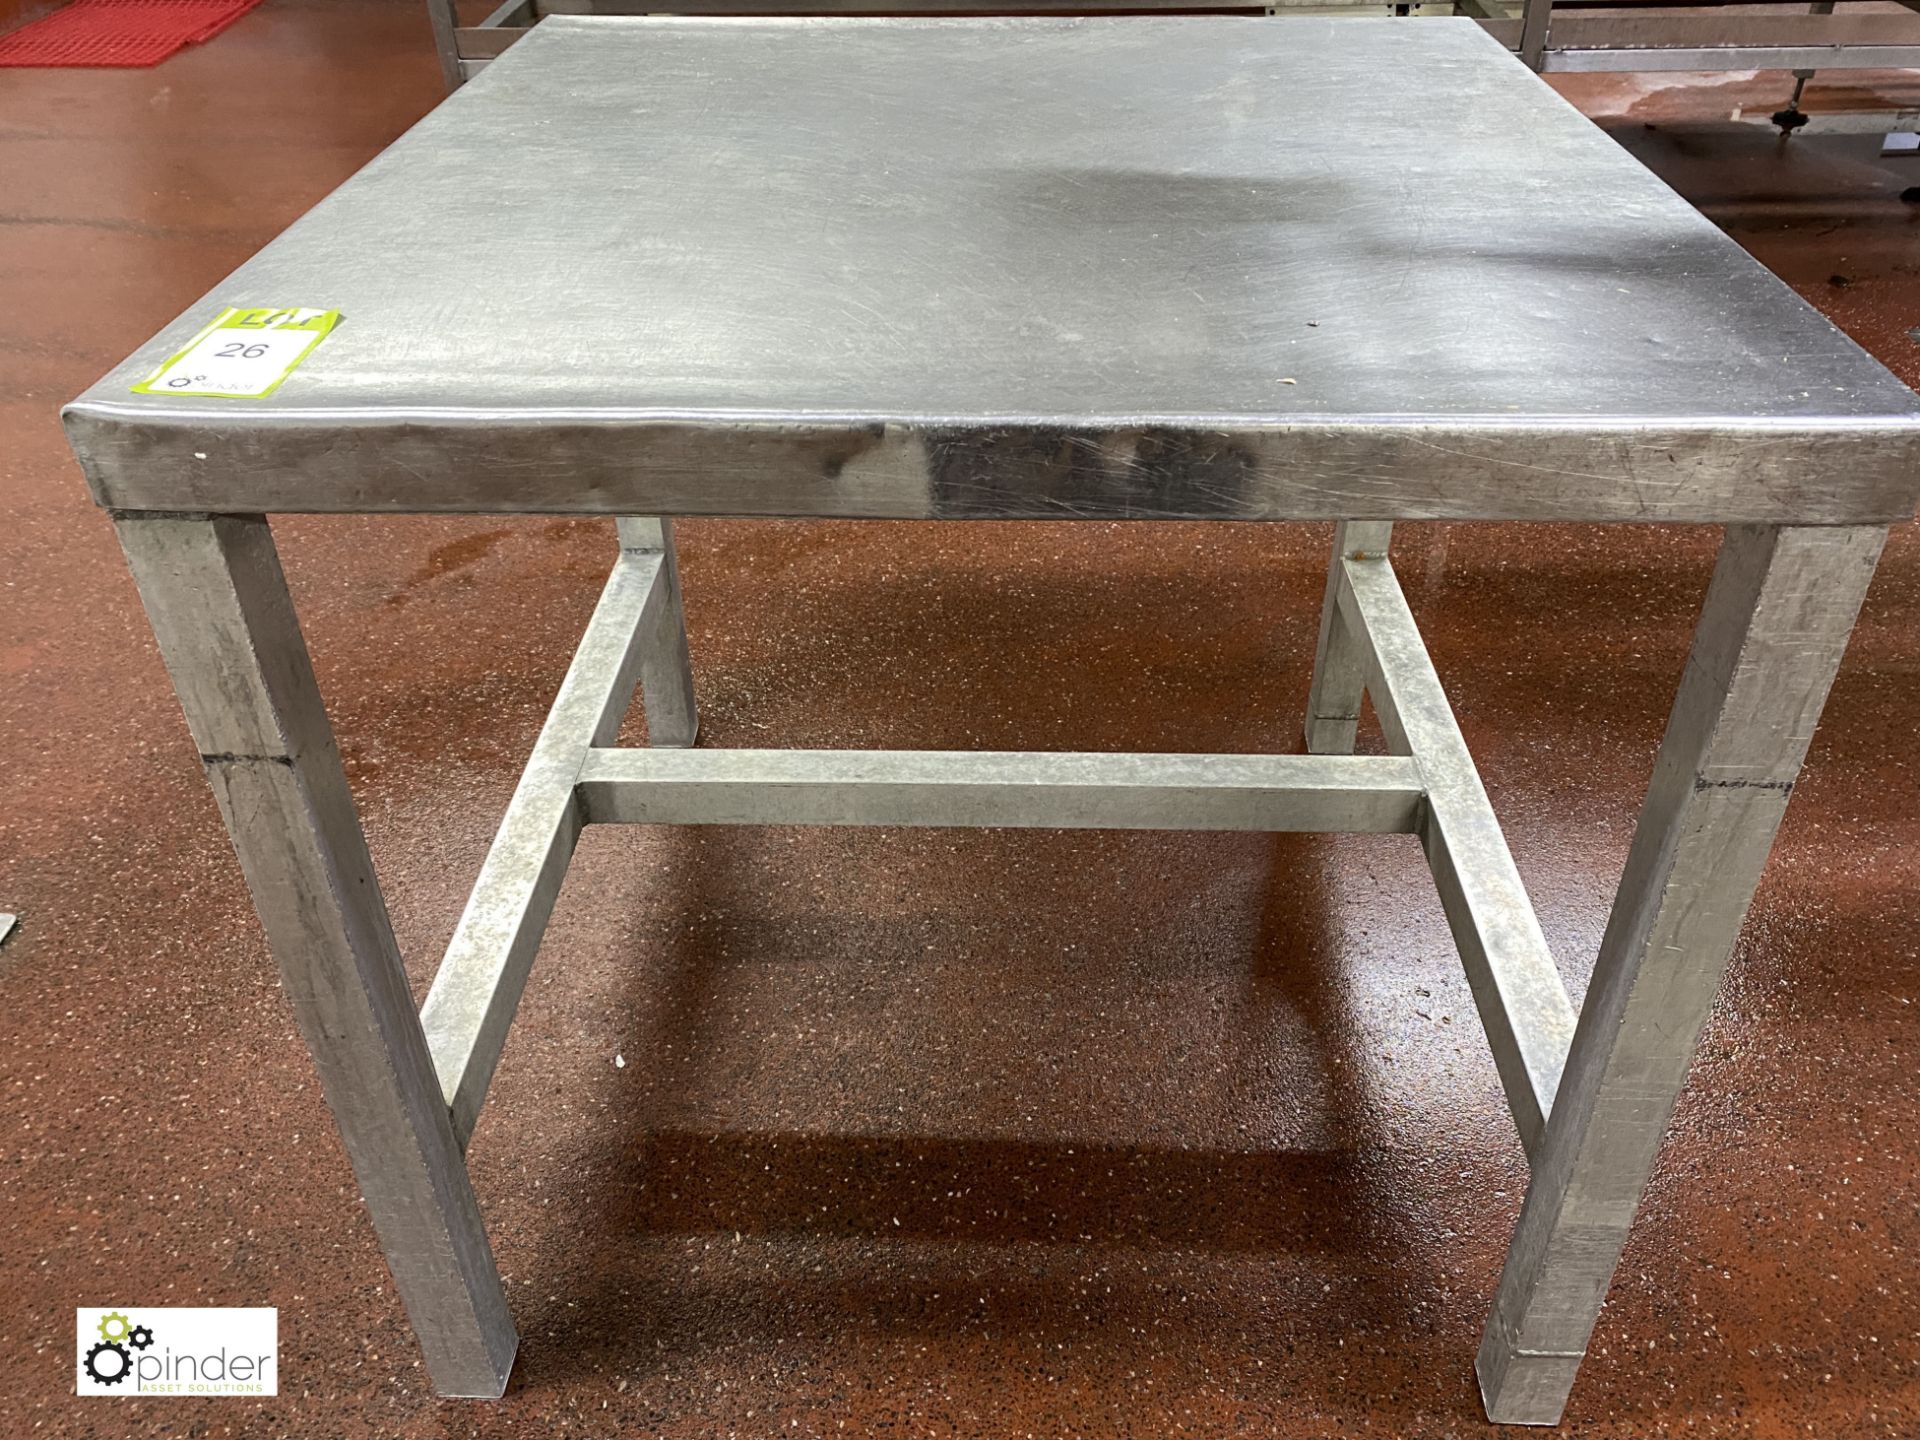 Stainless steel Preparation Table, 860mm x 900mm x 820mm high (please note there is a lift out fee